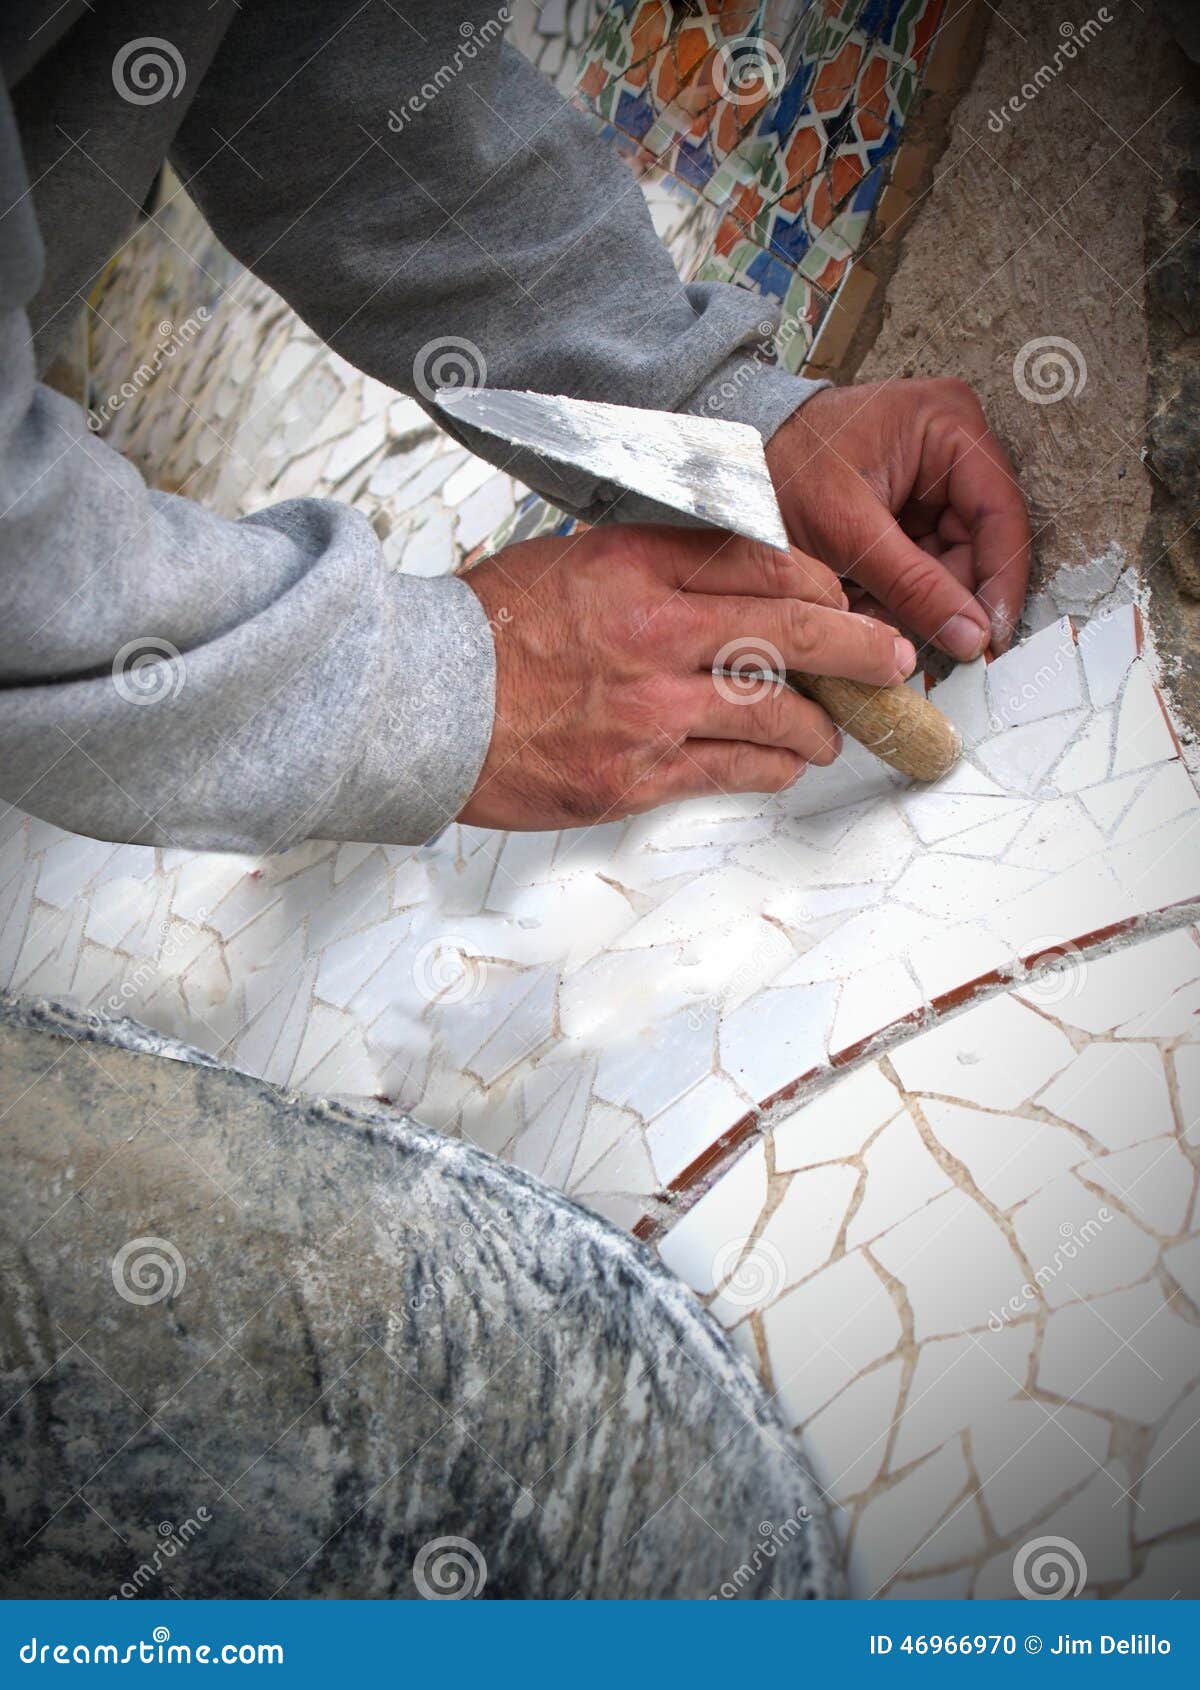 mosaic worker lays tiles